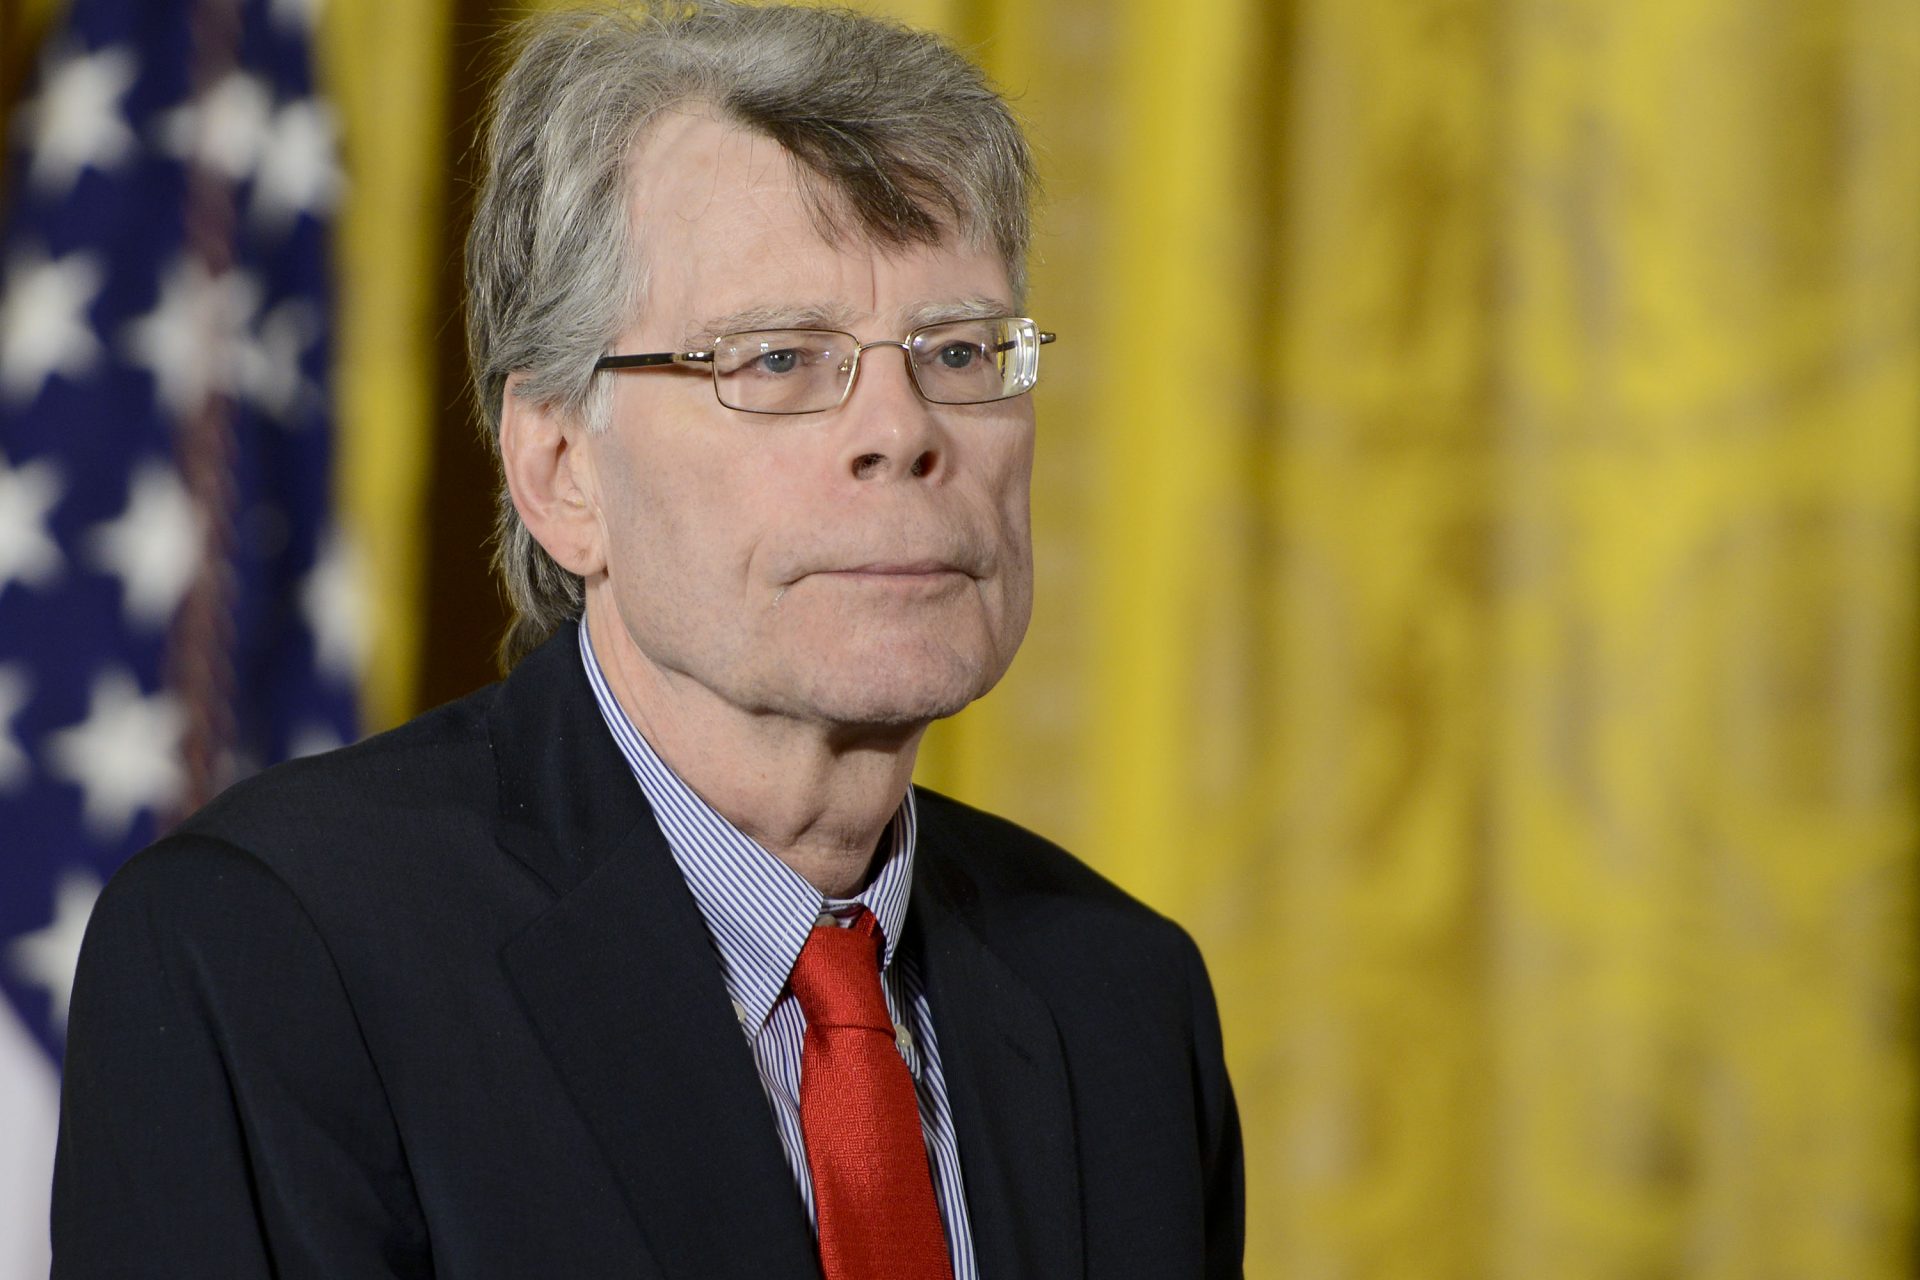 Stephen King calls for Biden to step down for love of country